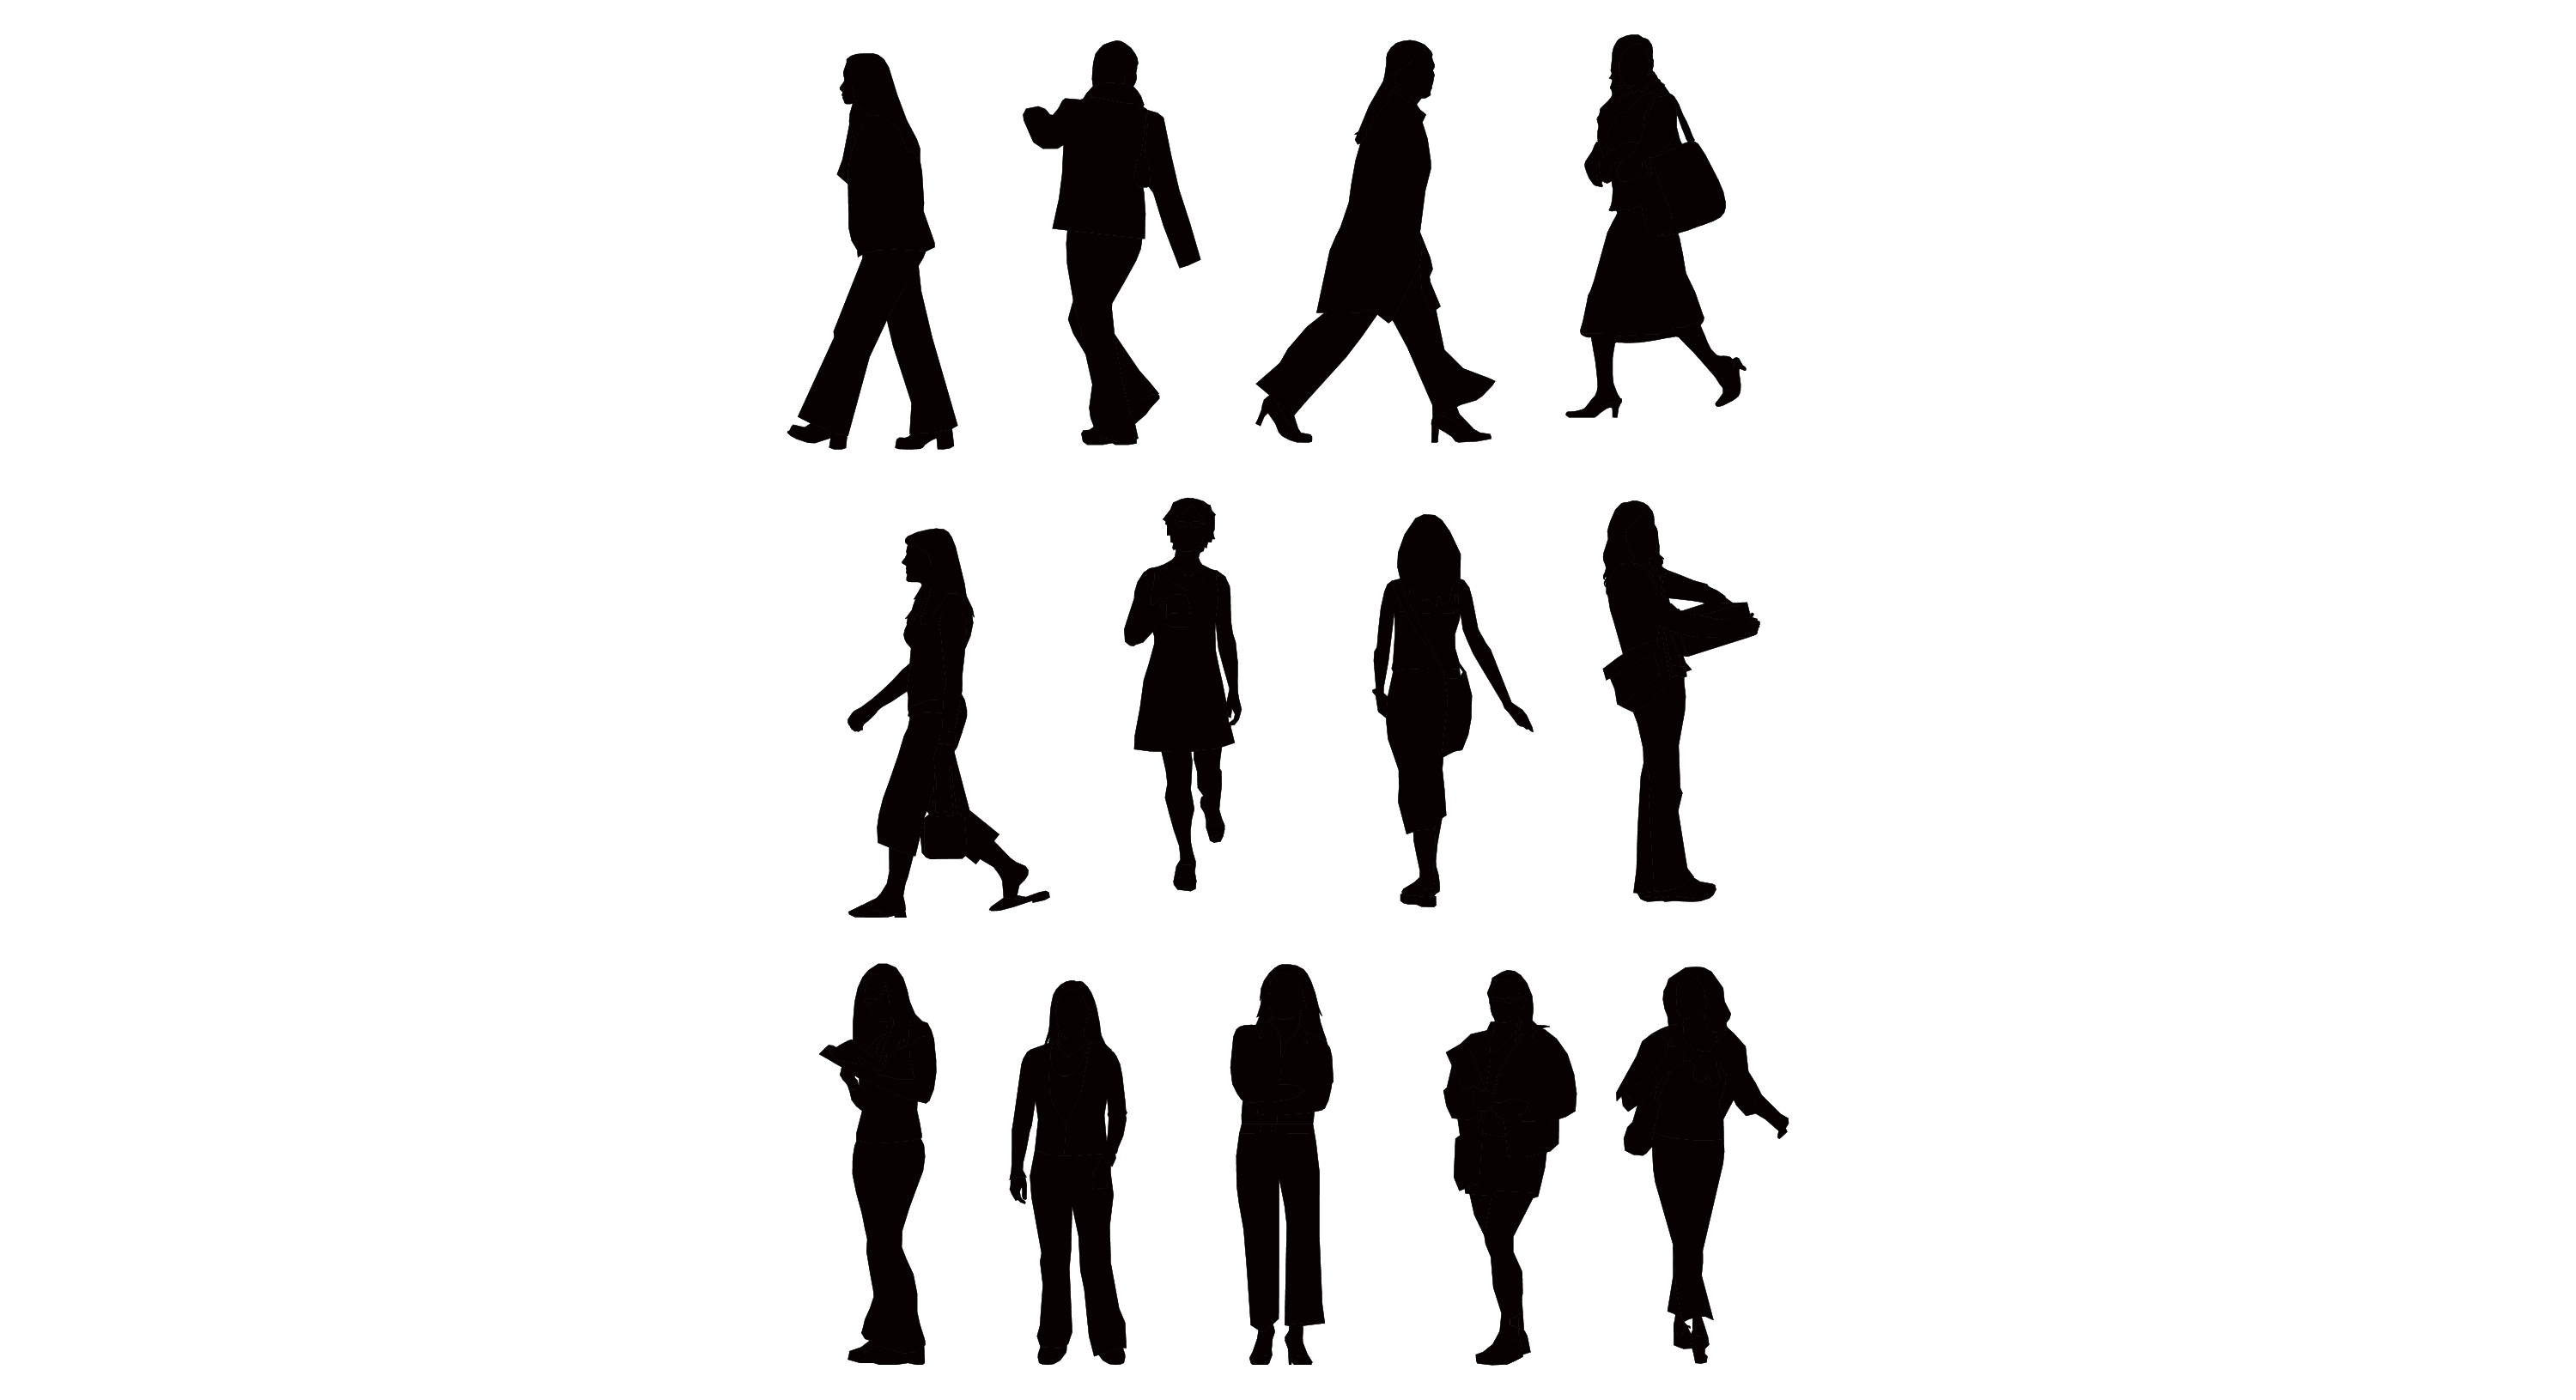 Free Vector People Silhouettes 15. - Clipart library - Clipart library